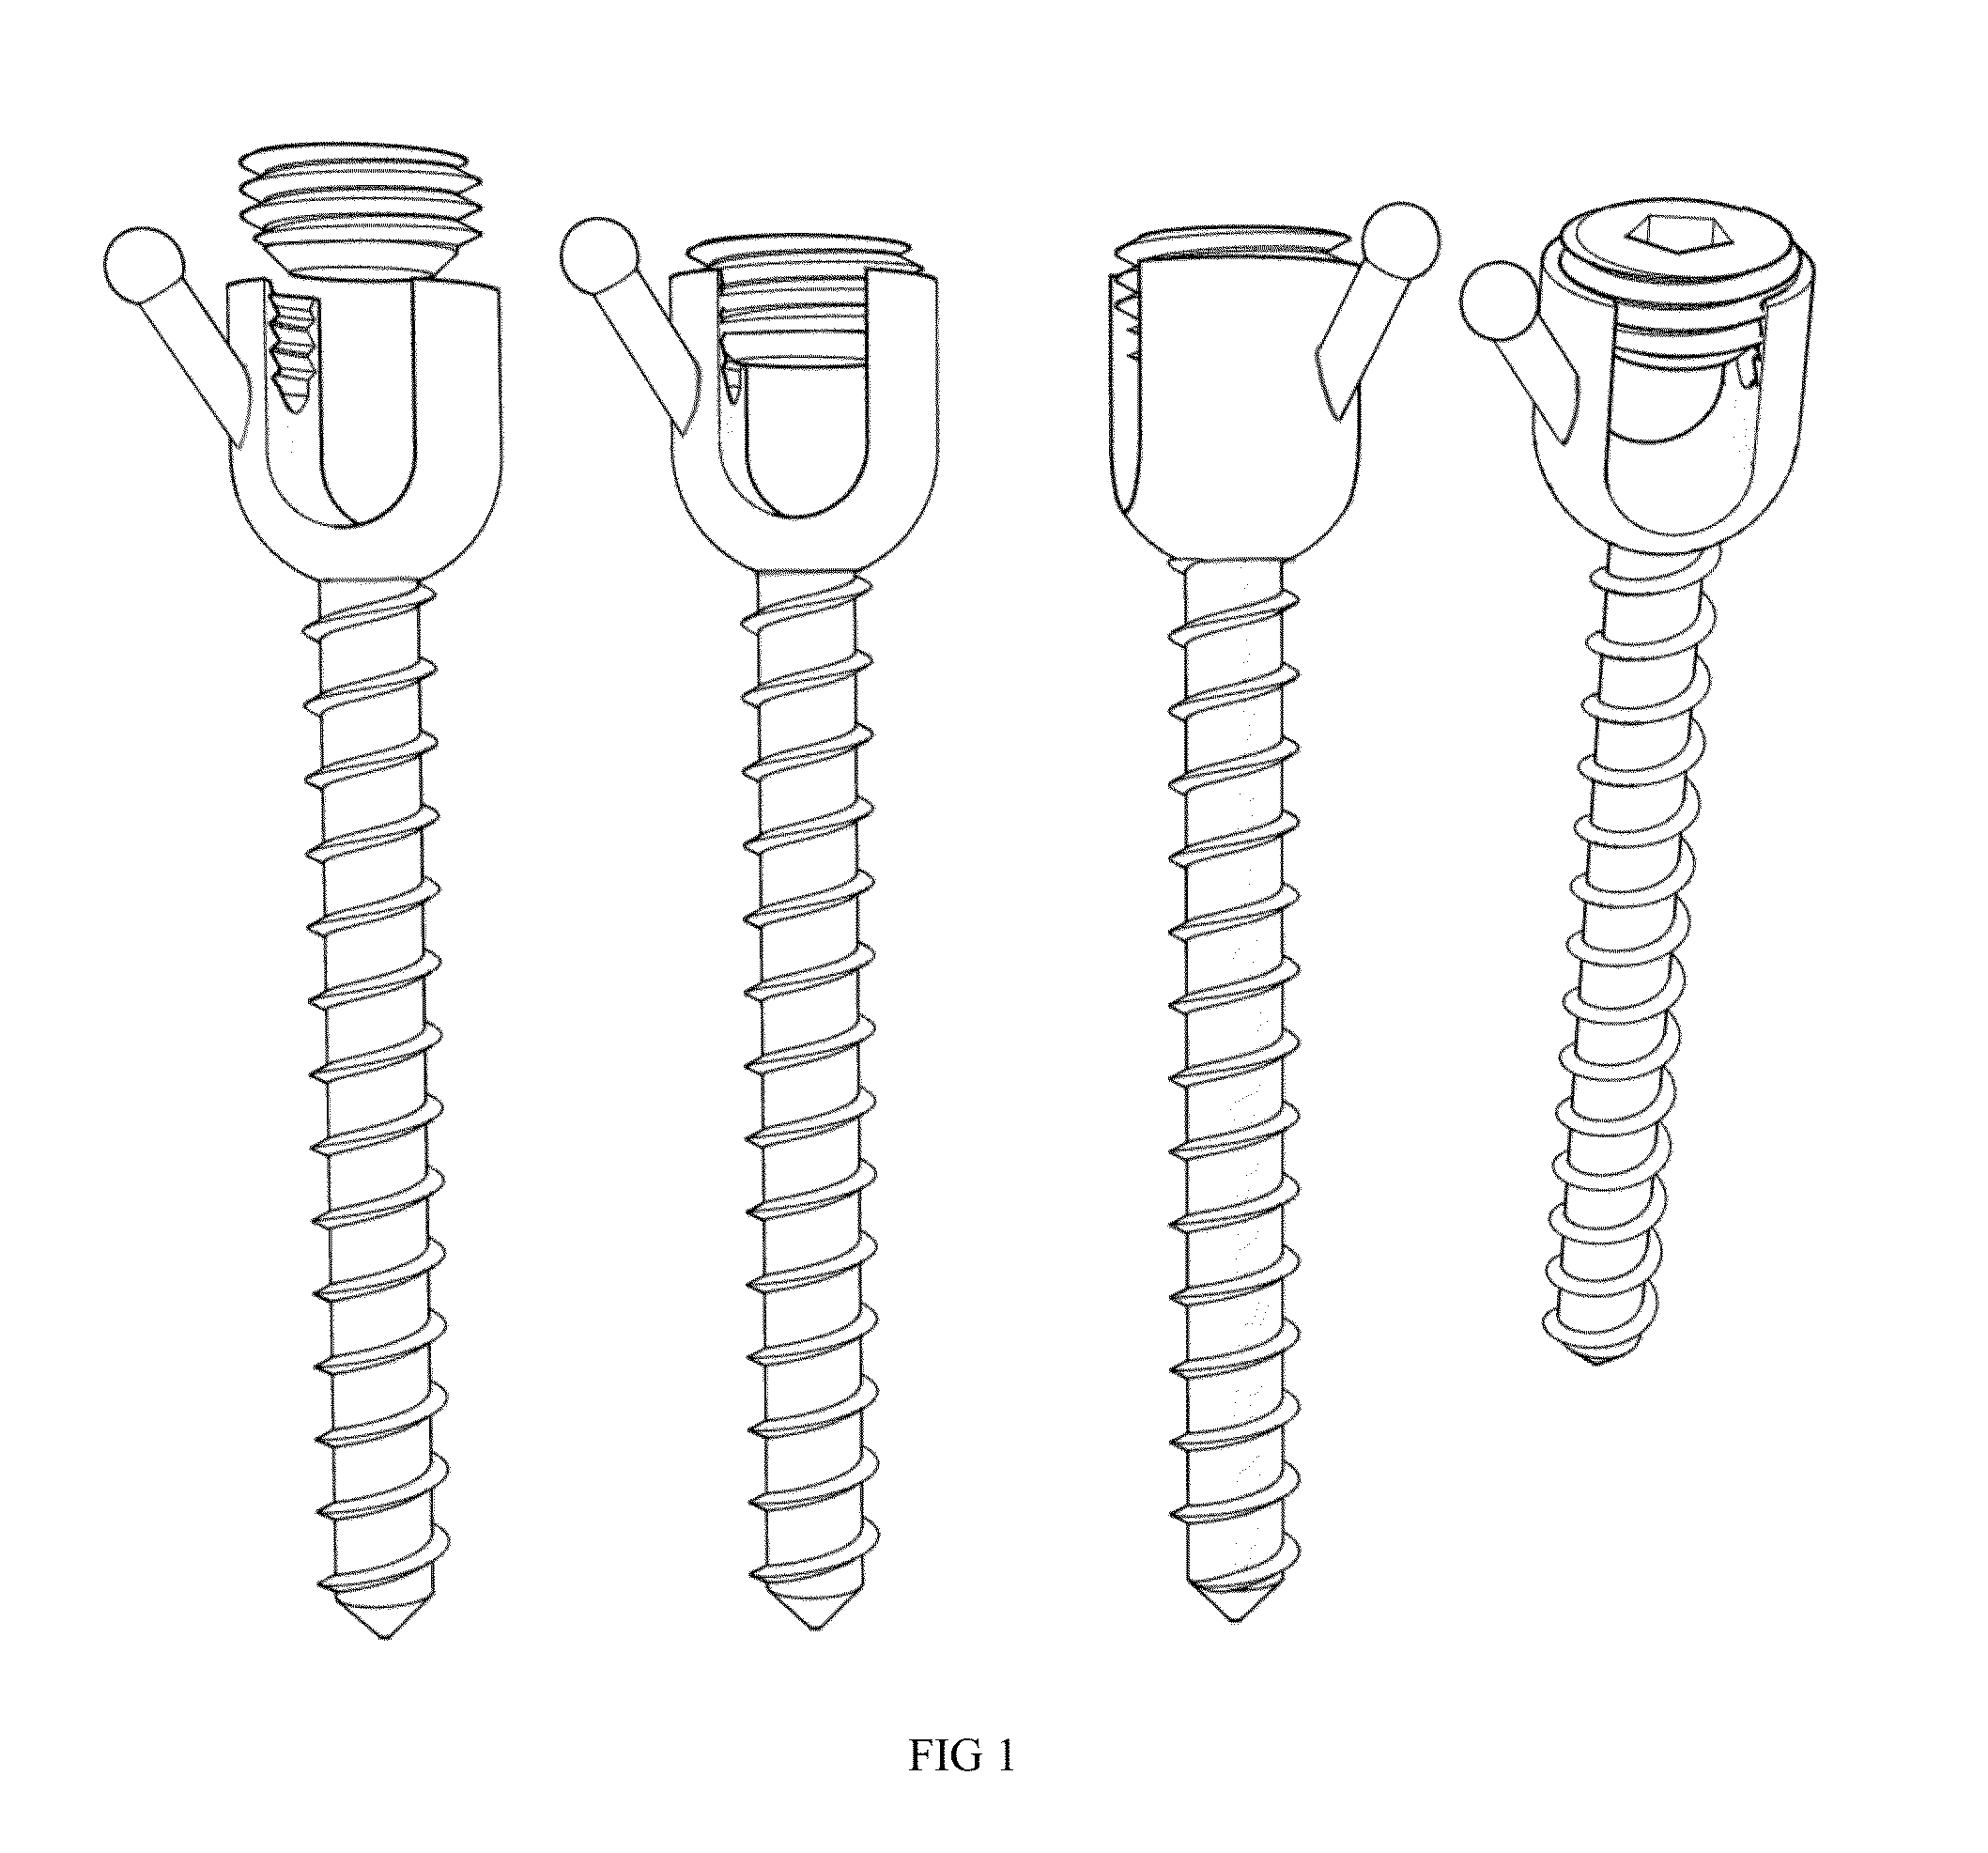 Method and System for the Treatment of Spinal Deformities